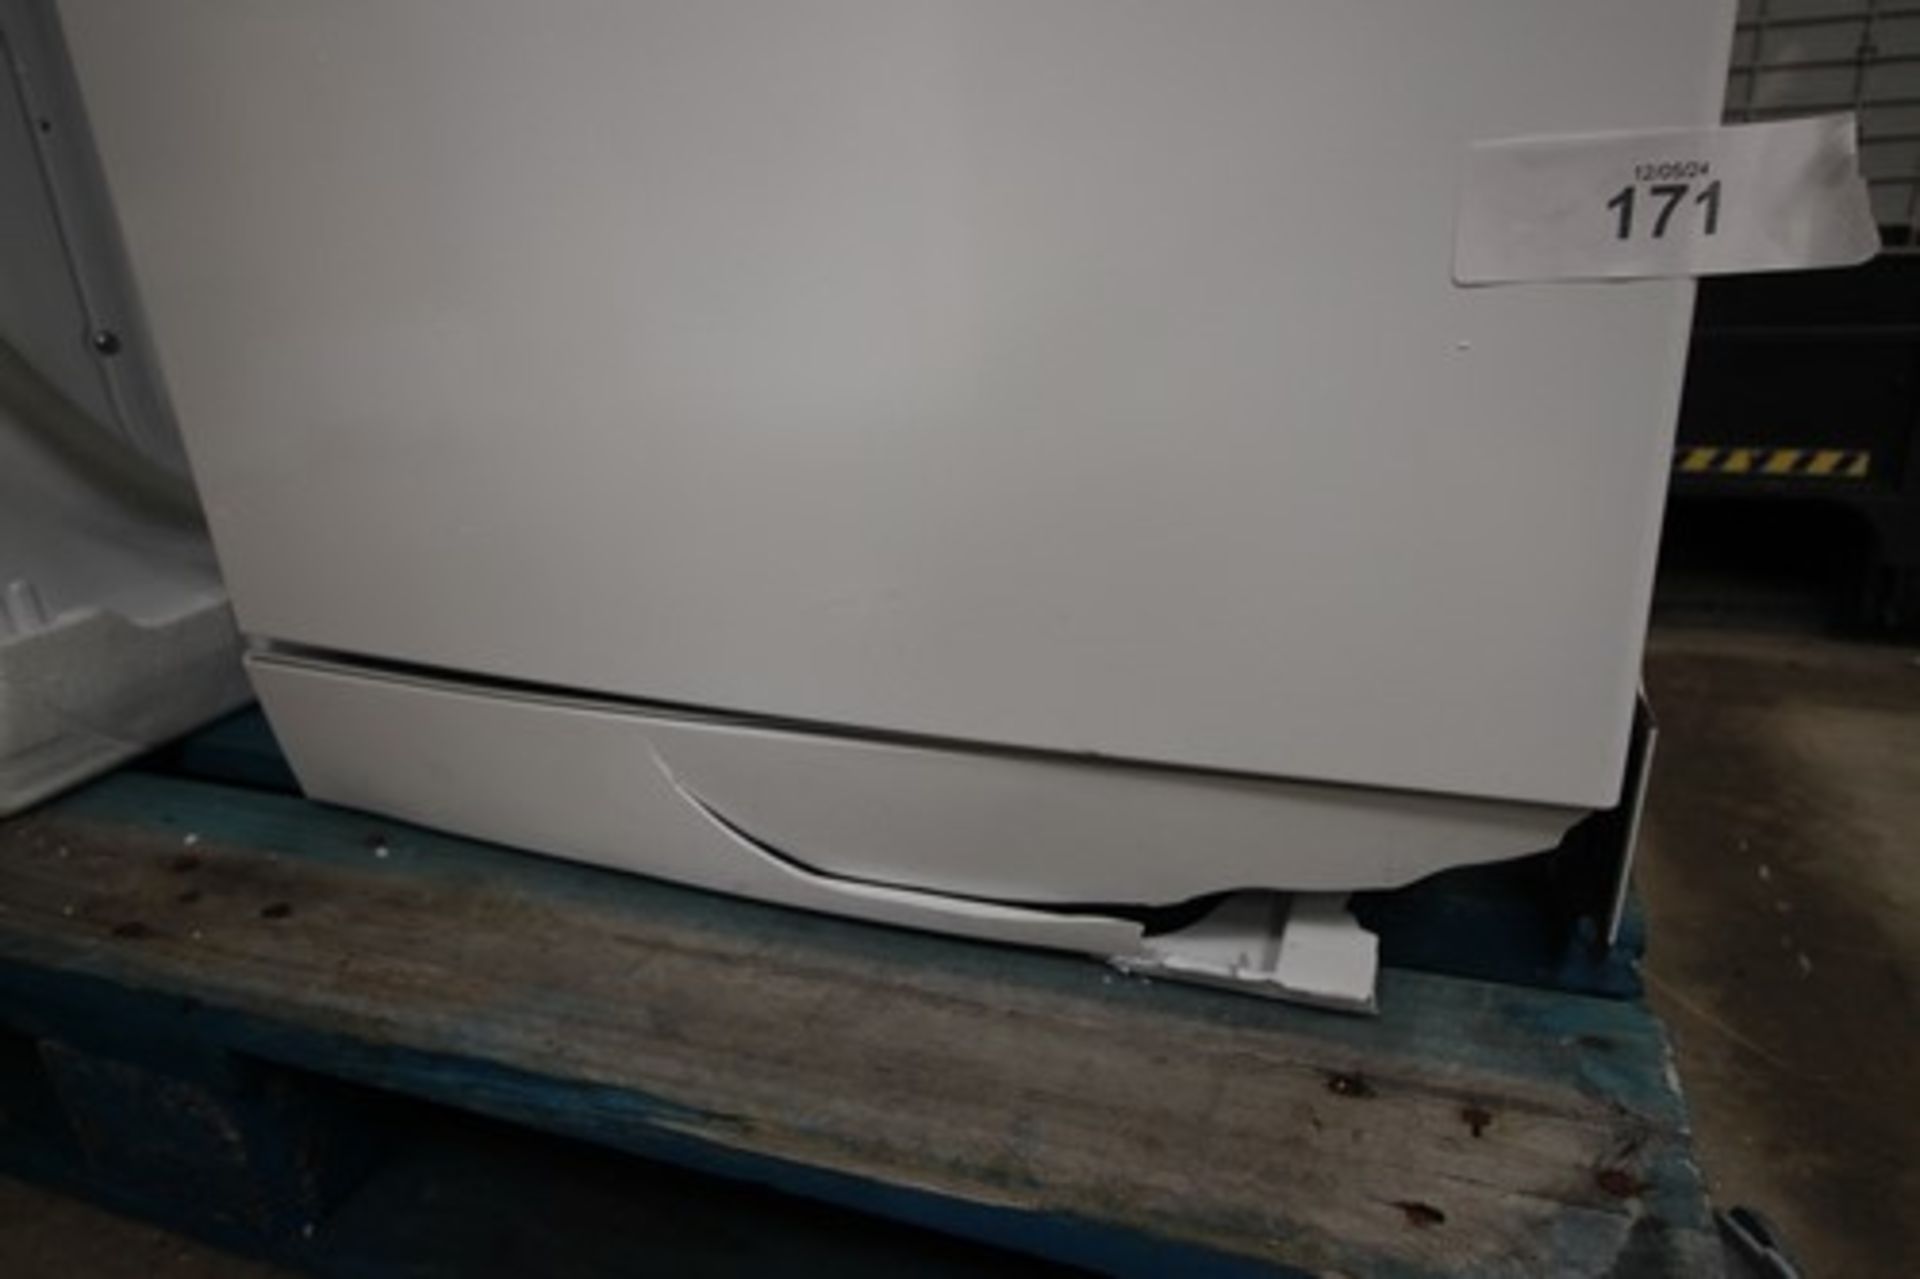 1 x Bosch Serie 2 dishwasher, Model SMS2HVW66G, missing front right foot and dented side panel - New - Image 2 of 4